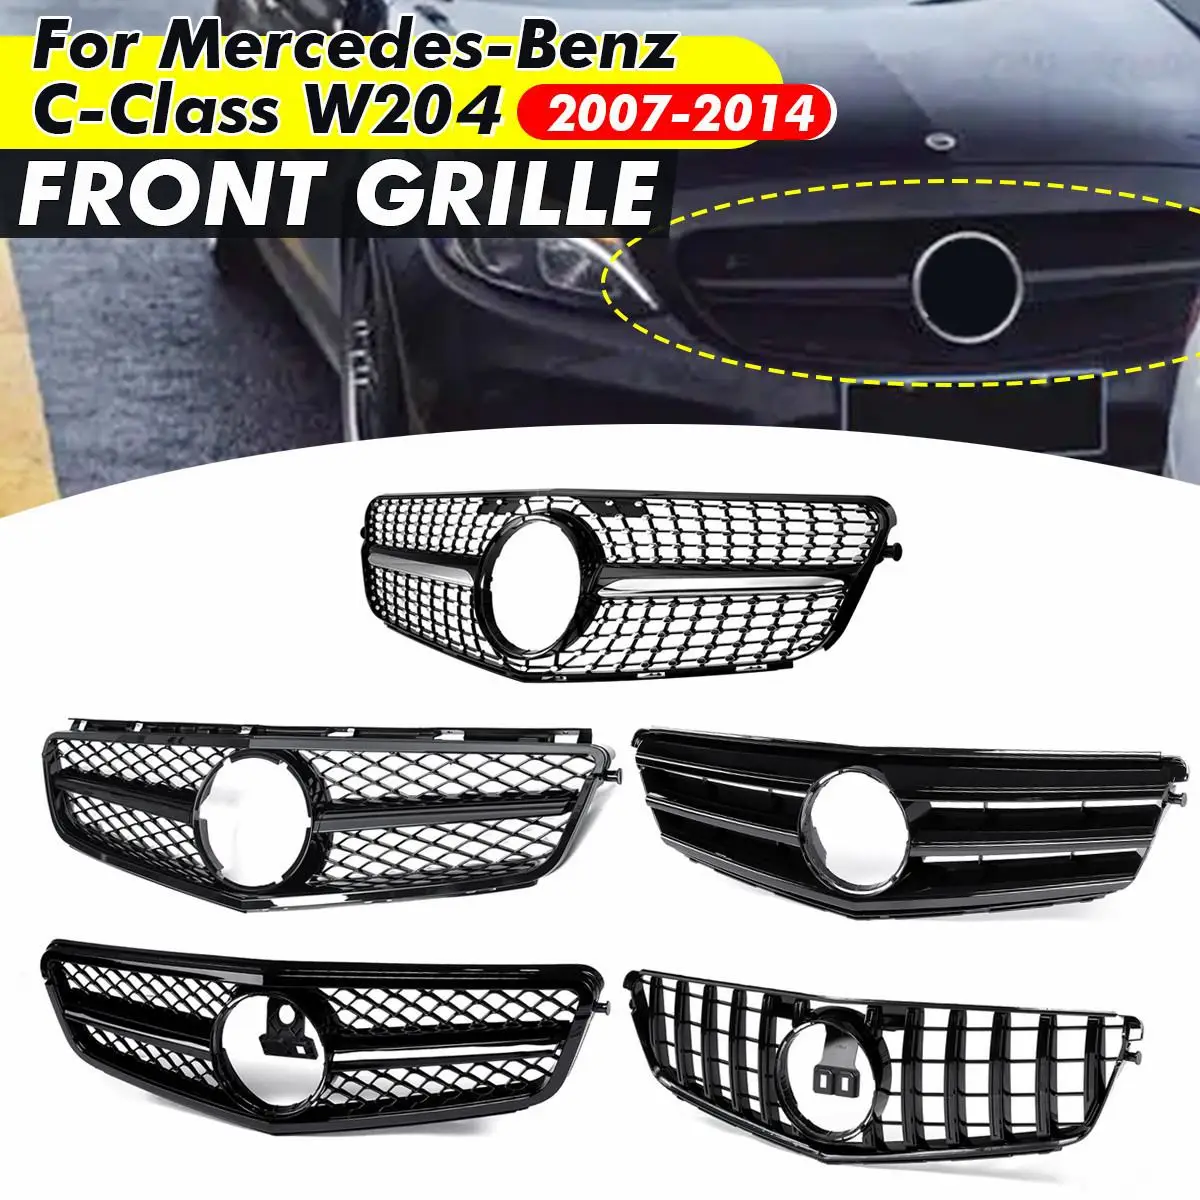 

W204 Car Front Grill Grille For Mercedes For Benz C Class W204 C180 C200 C300 C350 2007-2014 Front Bumper Radiator Racing Grille